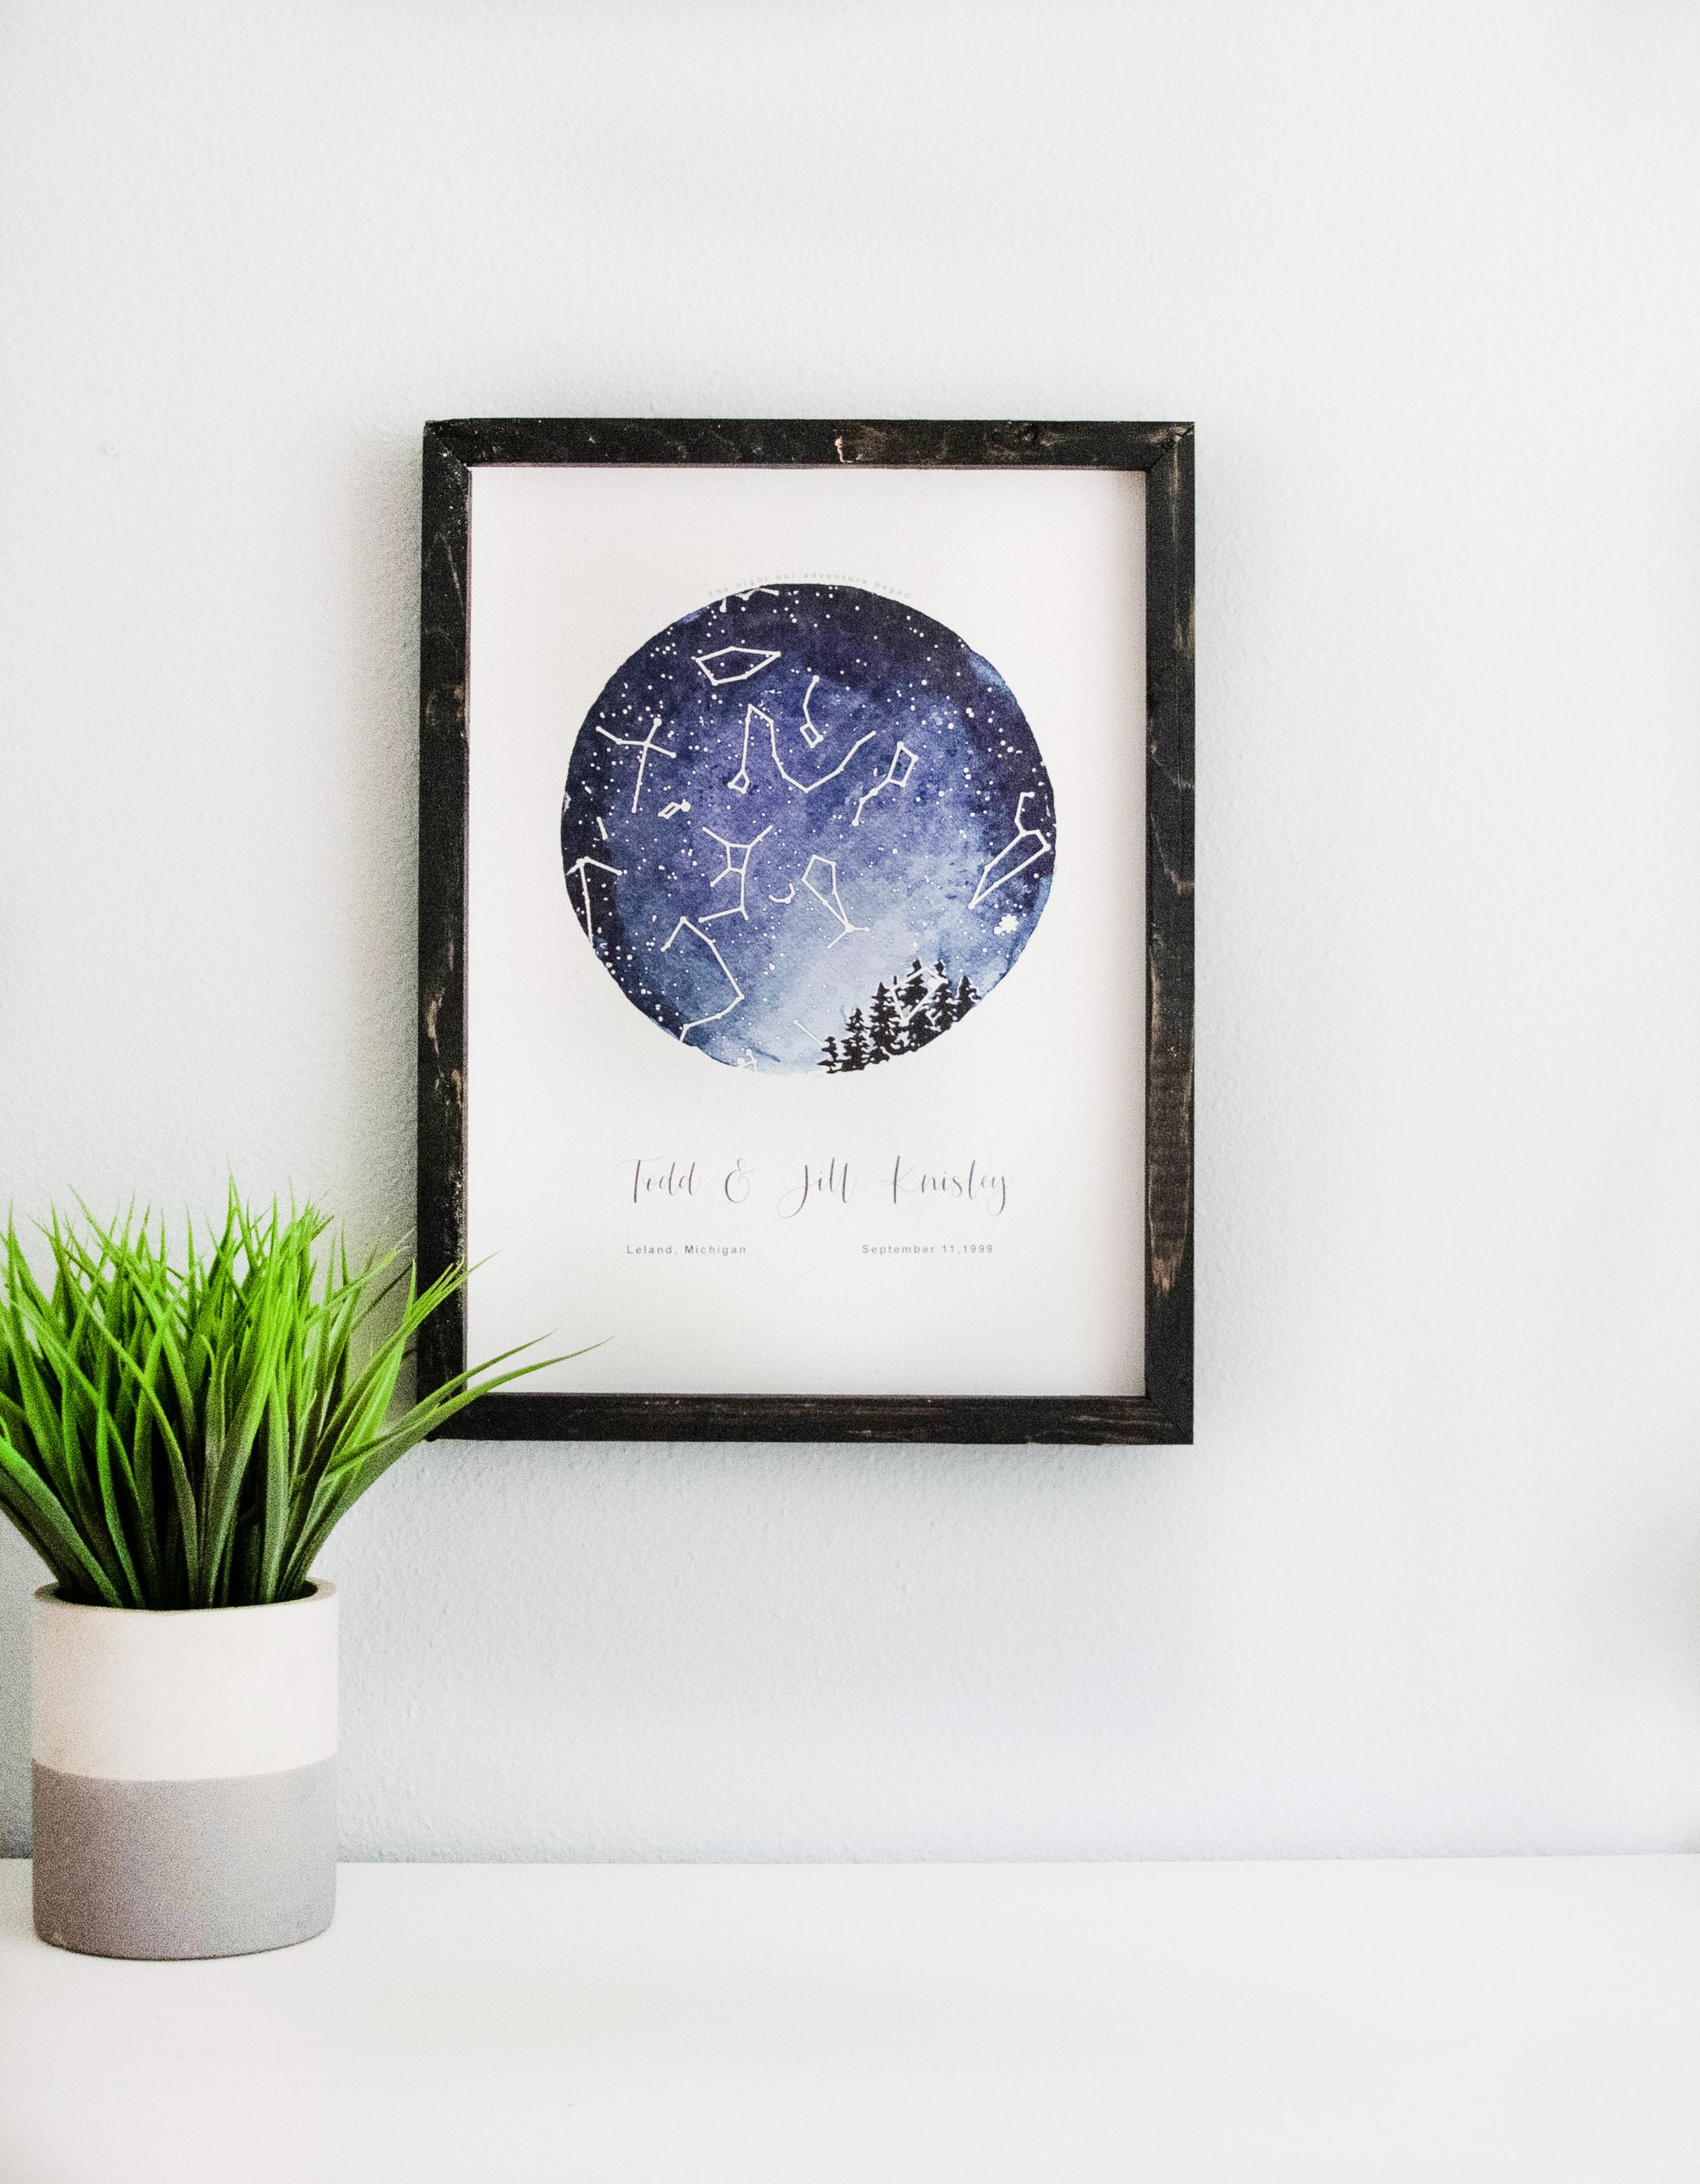 custom star map from a date and place in time.  blue circle with stars at that moment in time.  on white canvas in black frame on white table with plant.